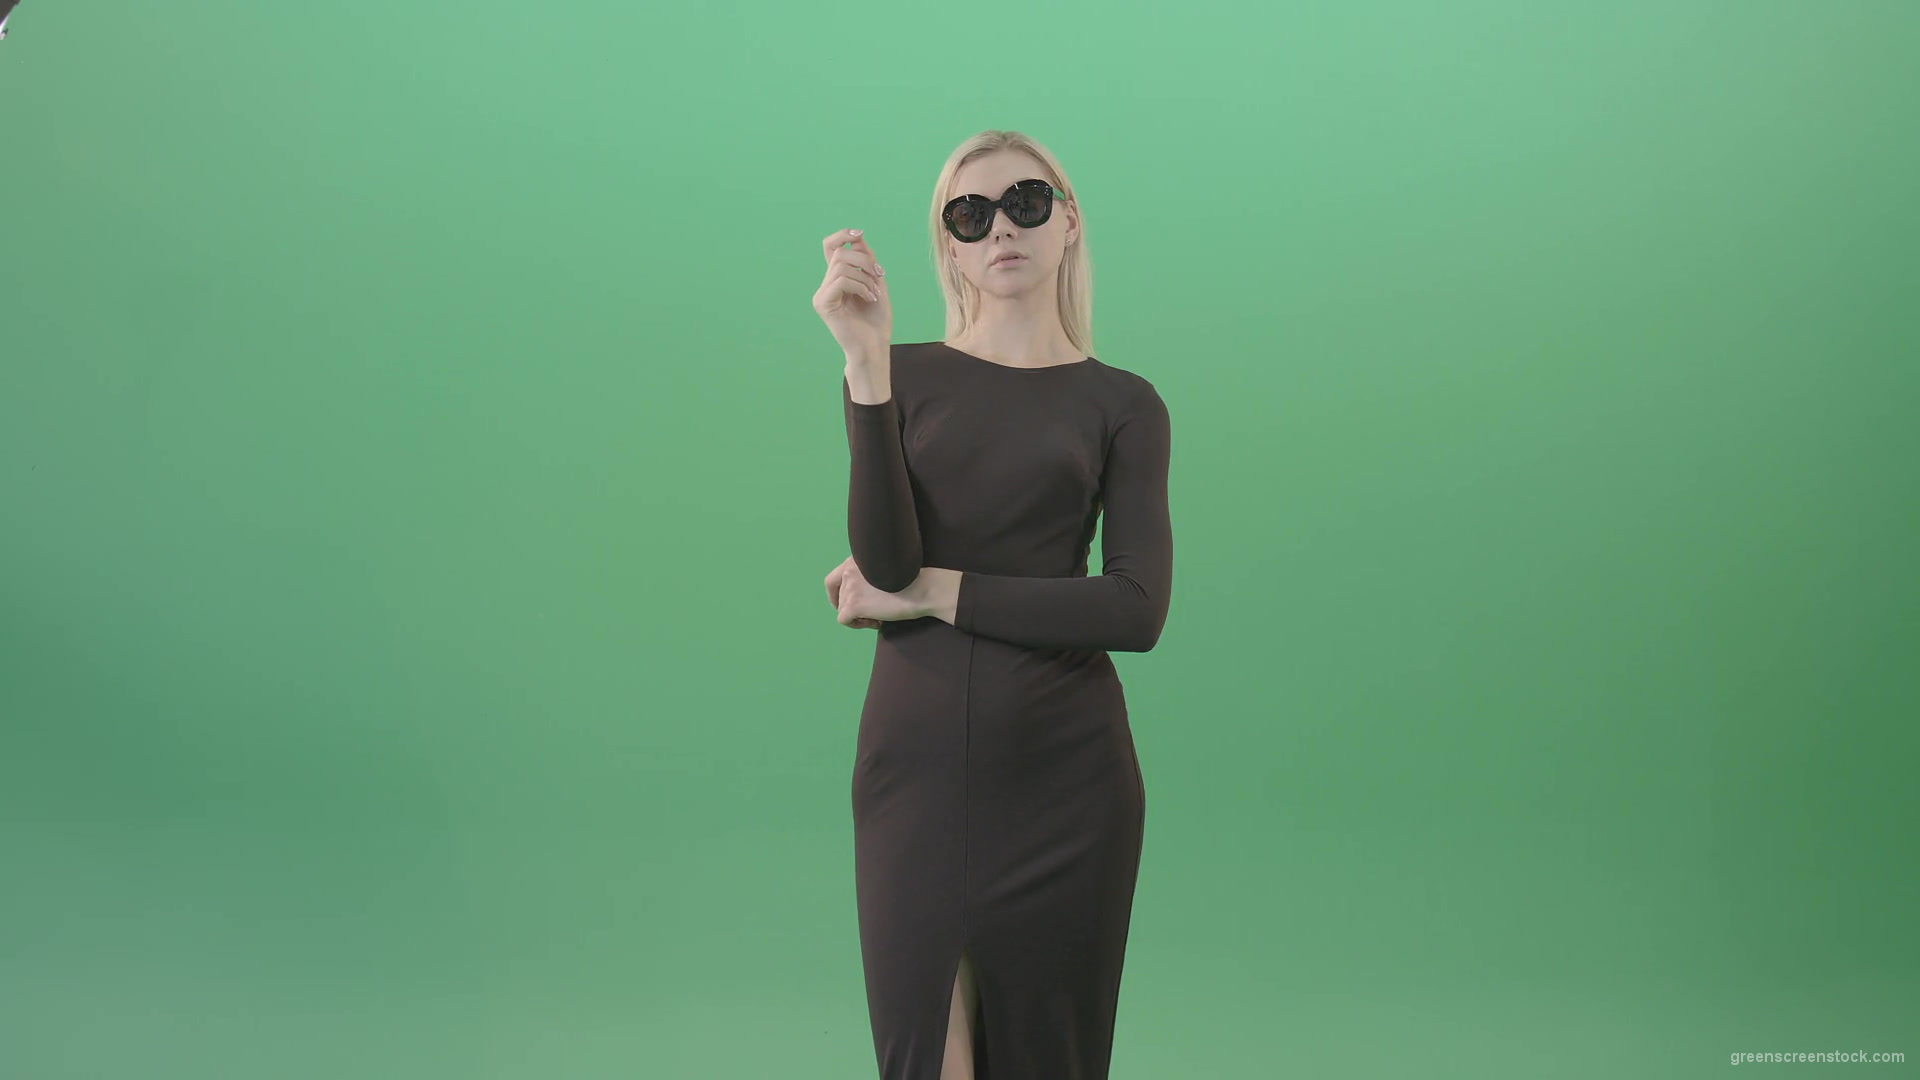 Elegant-woman-in-black-suite-searching-a-virtual-products-on-touch-screen-in-green-screen-studio-4K-Video-Footage-1920_006 Green Screen Stock